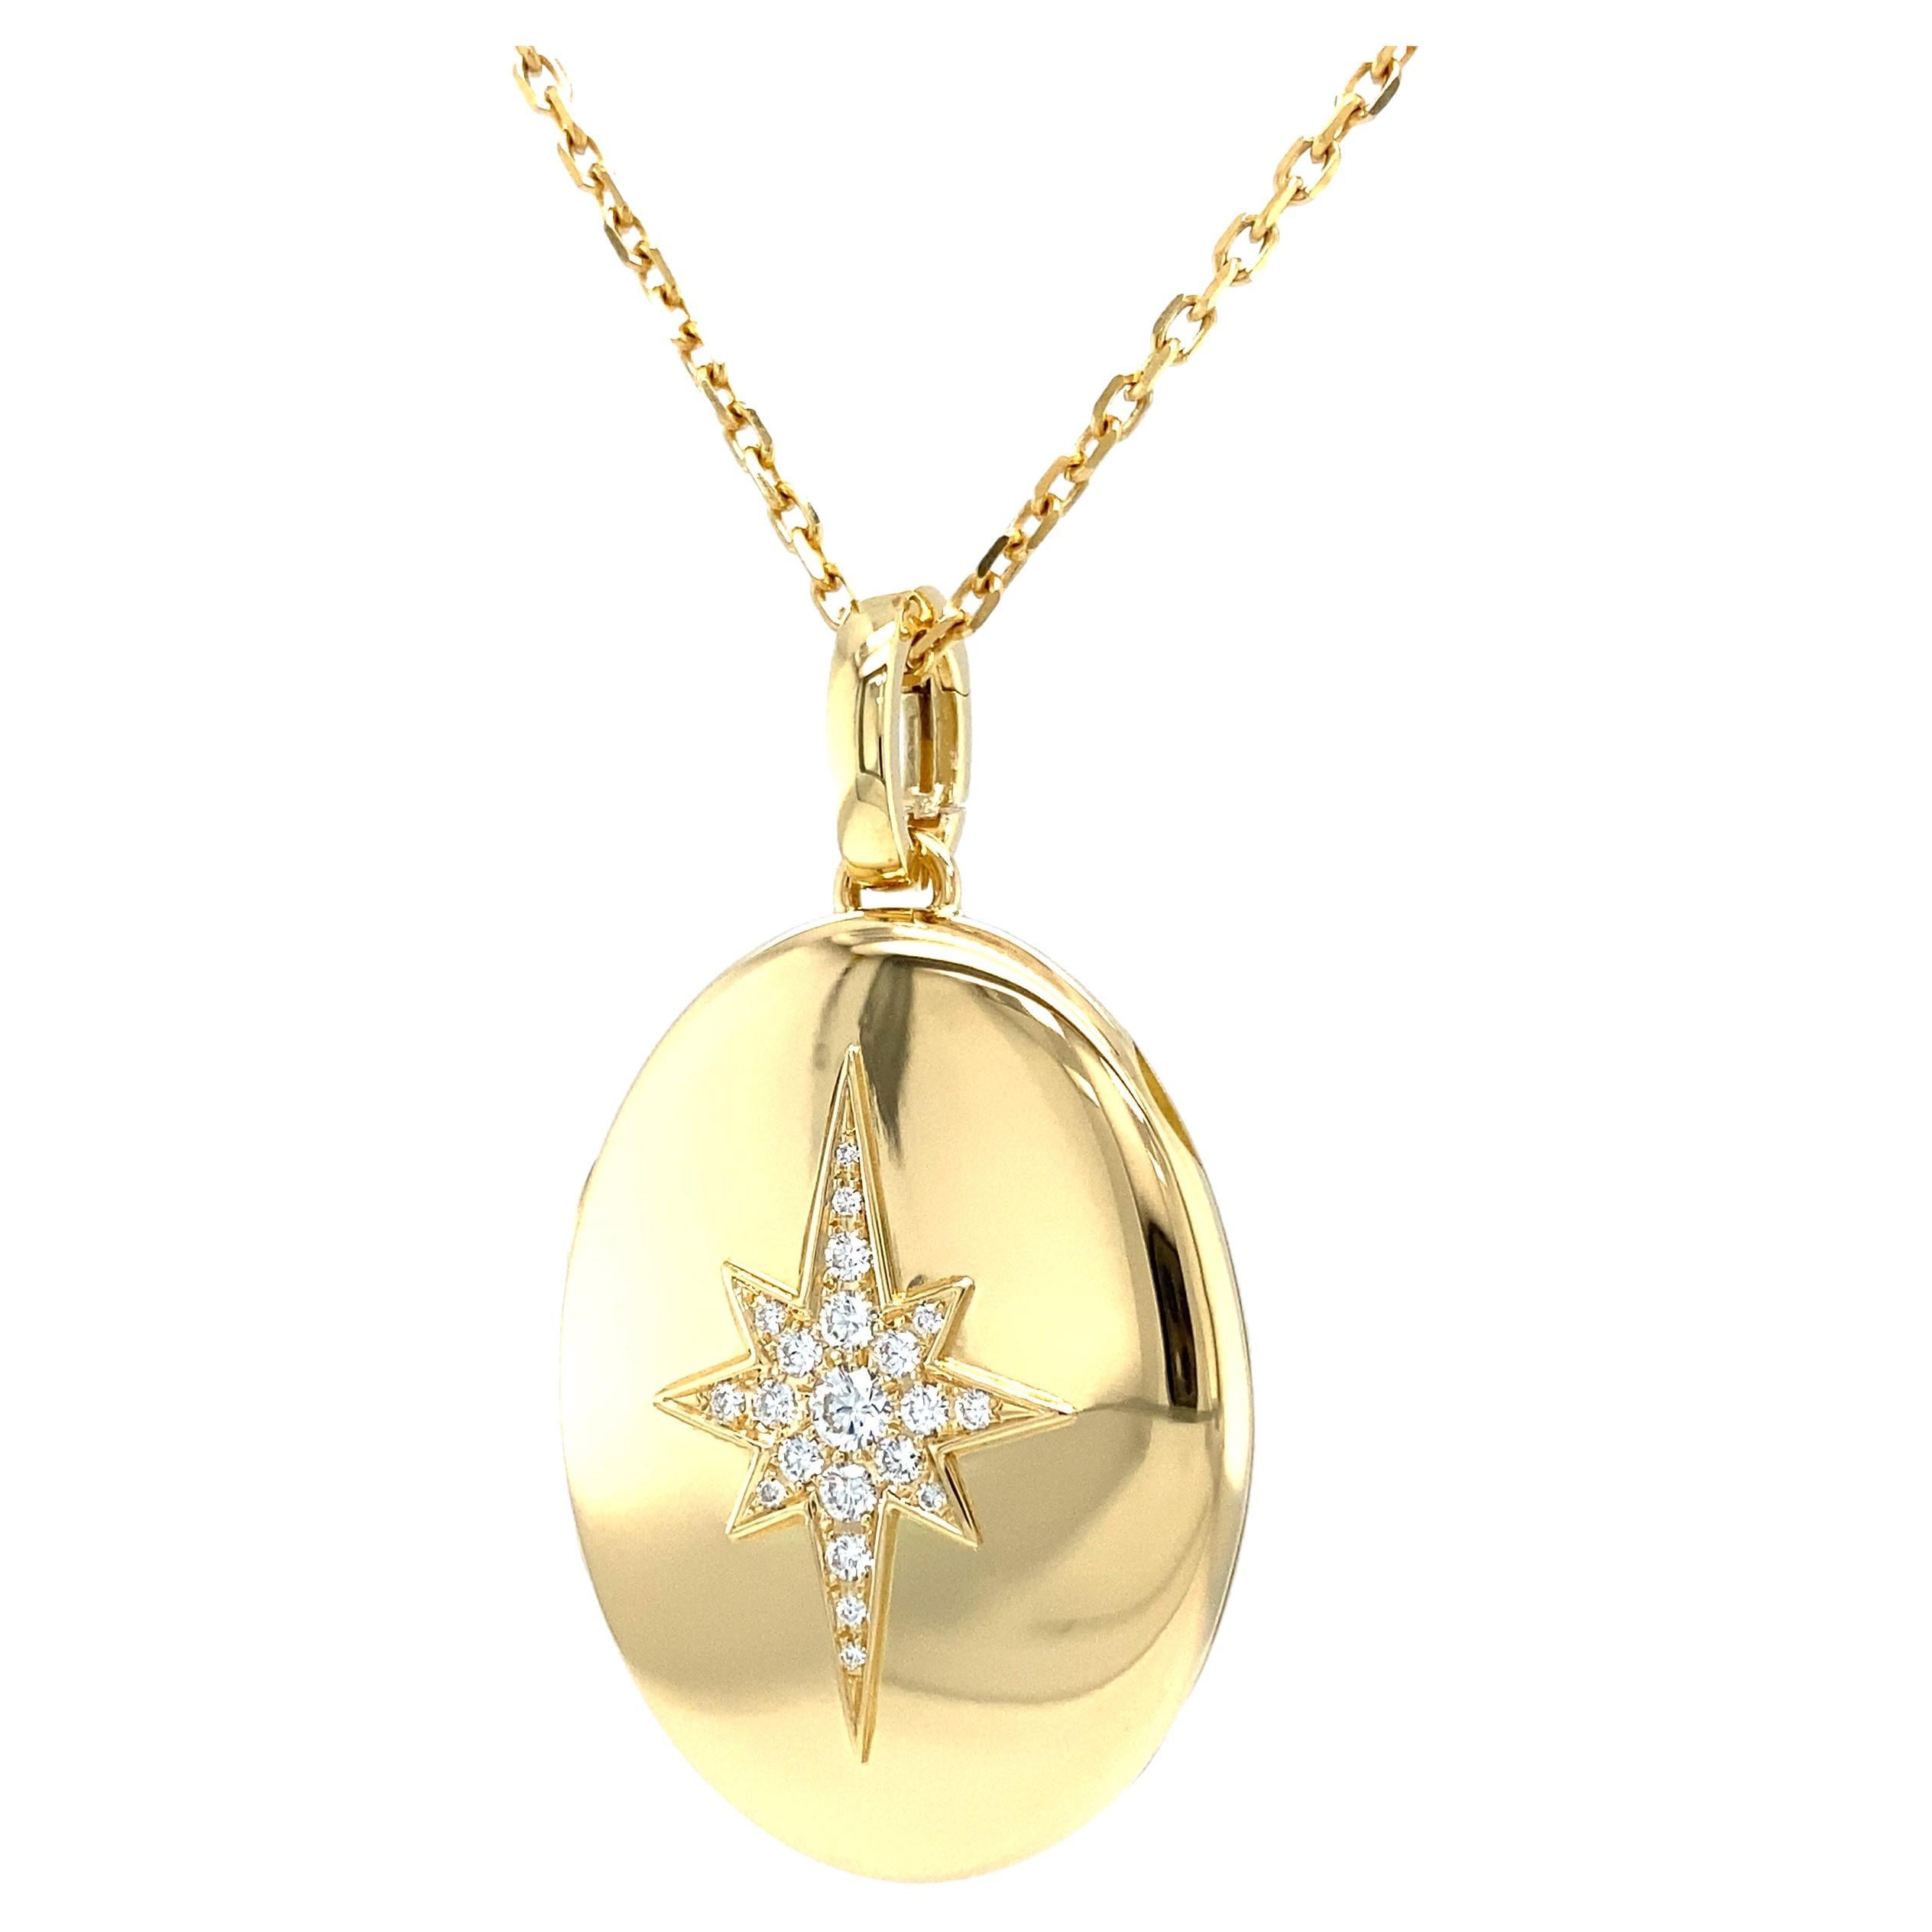 Oval Polished Locket Pendant Necklace - 18k Yellow Gold - 9 Diamonds 0.14ct G VS For Sale